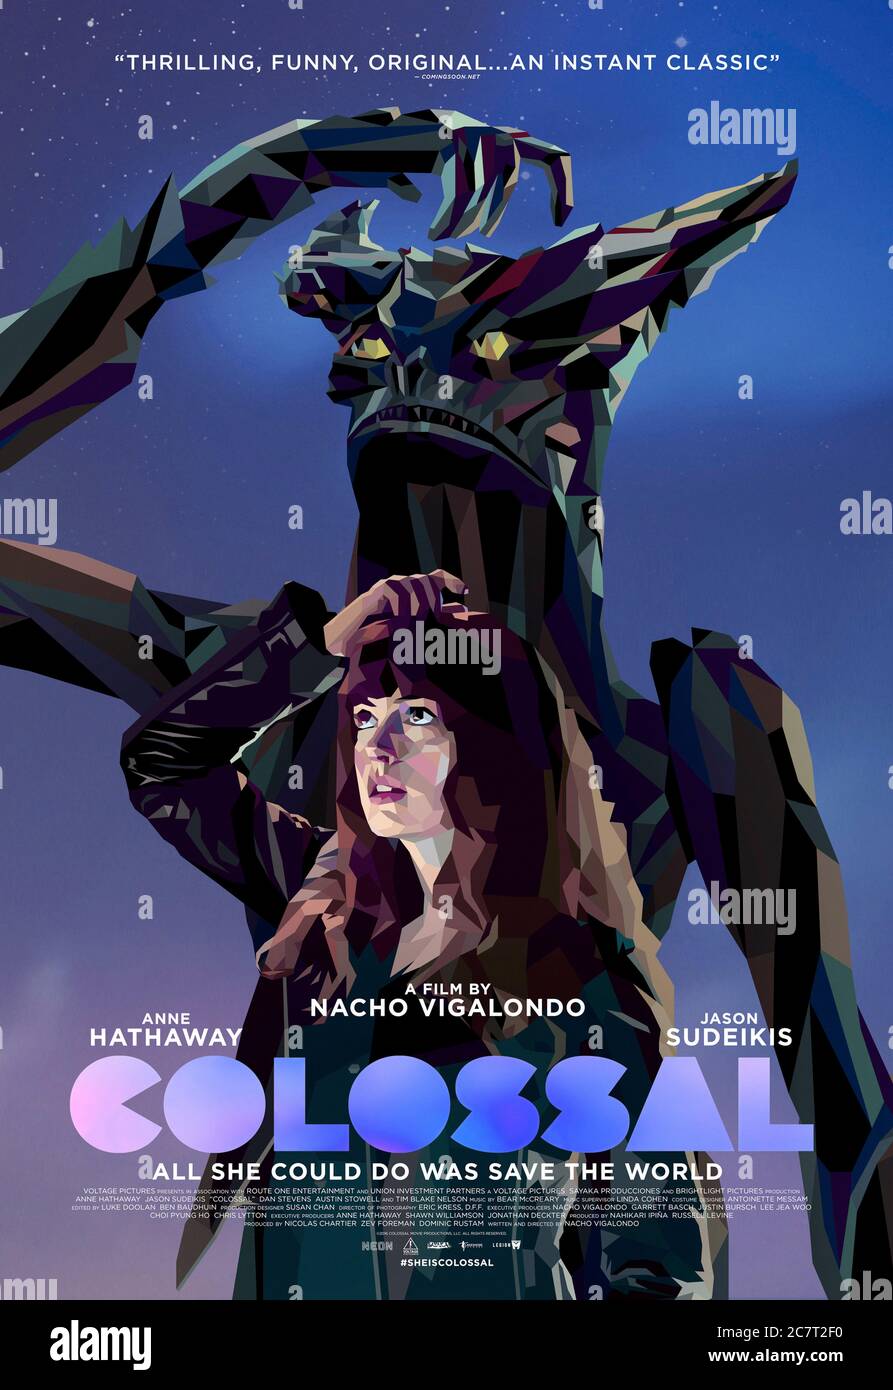 Colossal (2016) directed by Nacho Vigalondo and starring Anne Hathaway, Jason Sudeikis and Austin Stowell. A jilted woman discovers she is somehow connected a giant monster reeking havoc in South Korea. Stock Photo